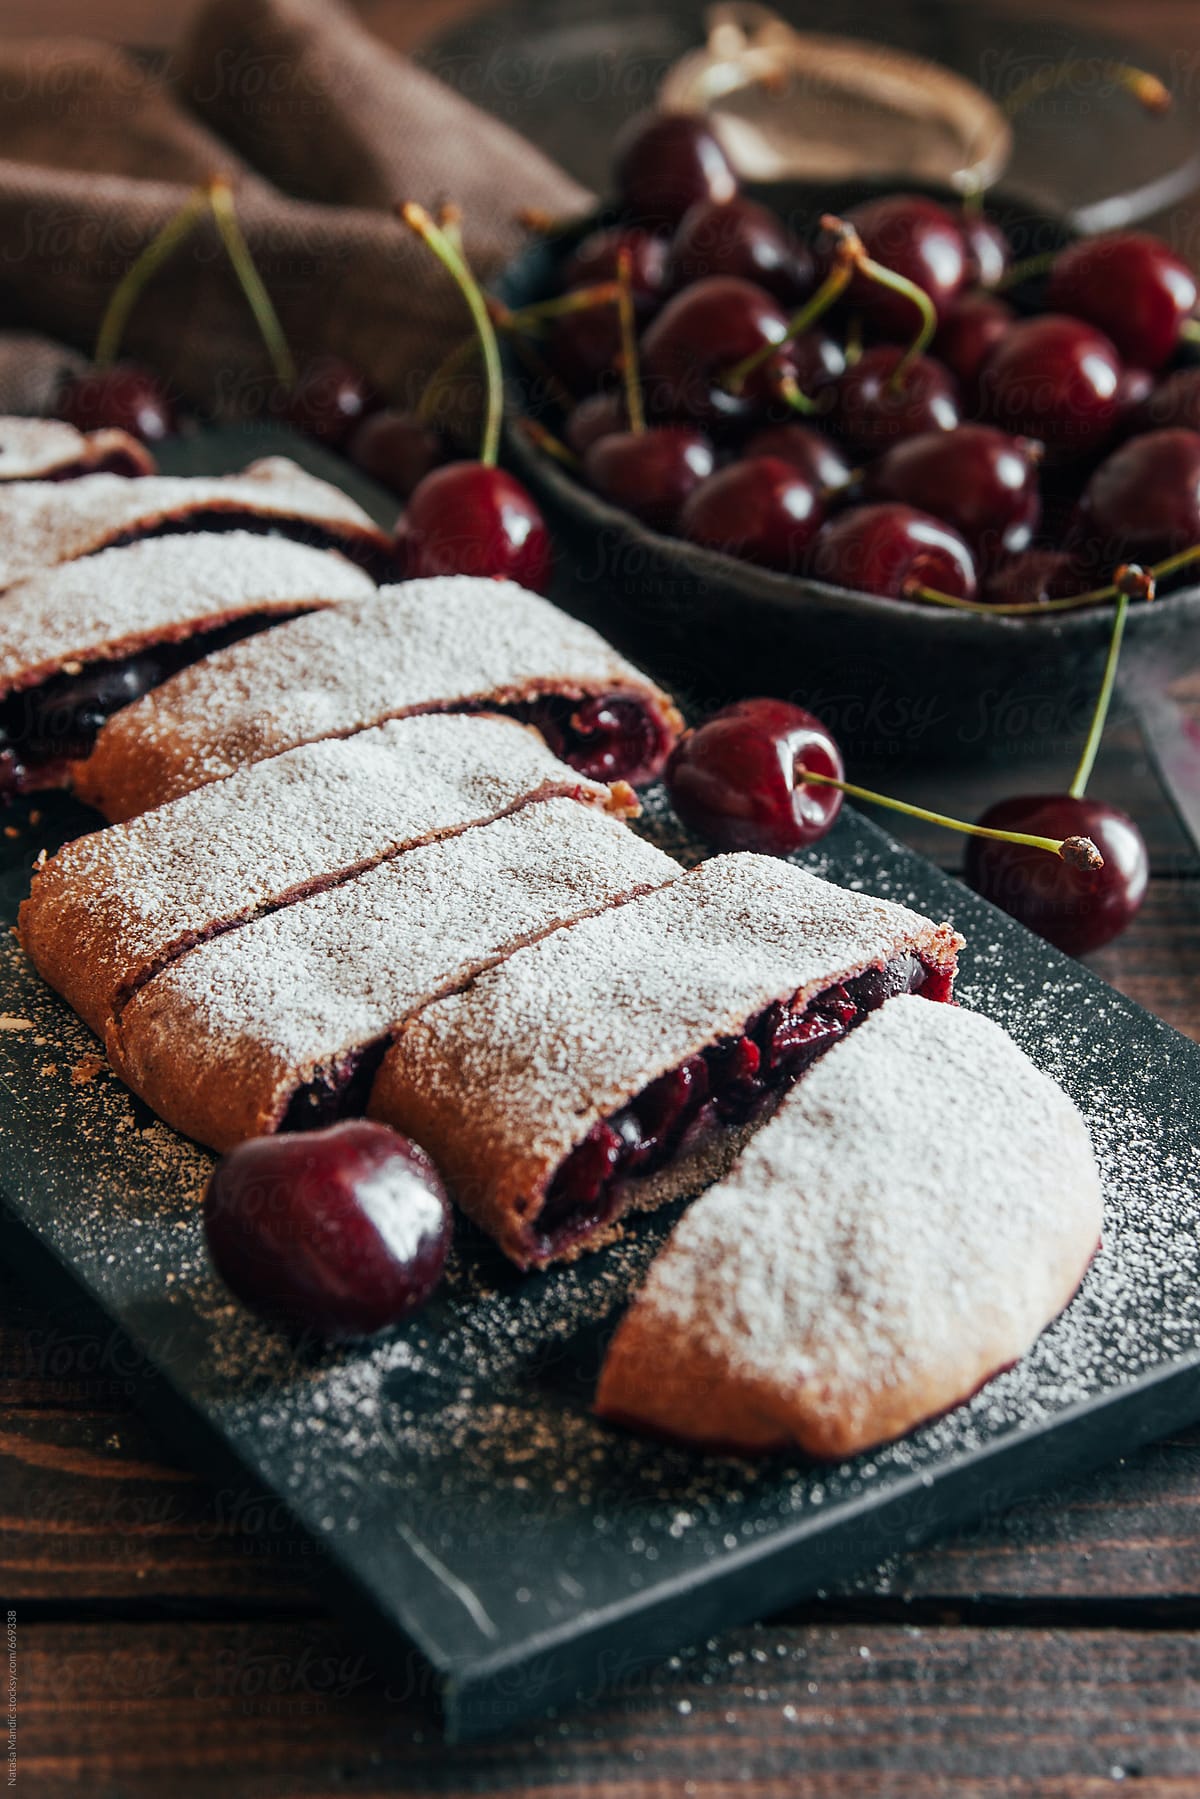 Delicious strudel with cherries